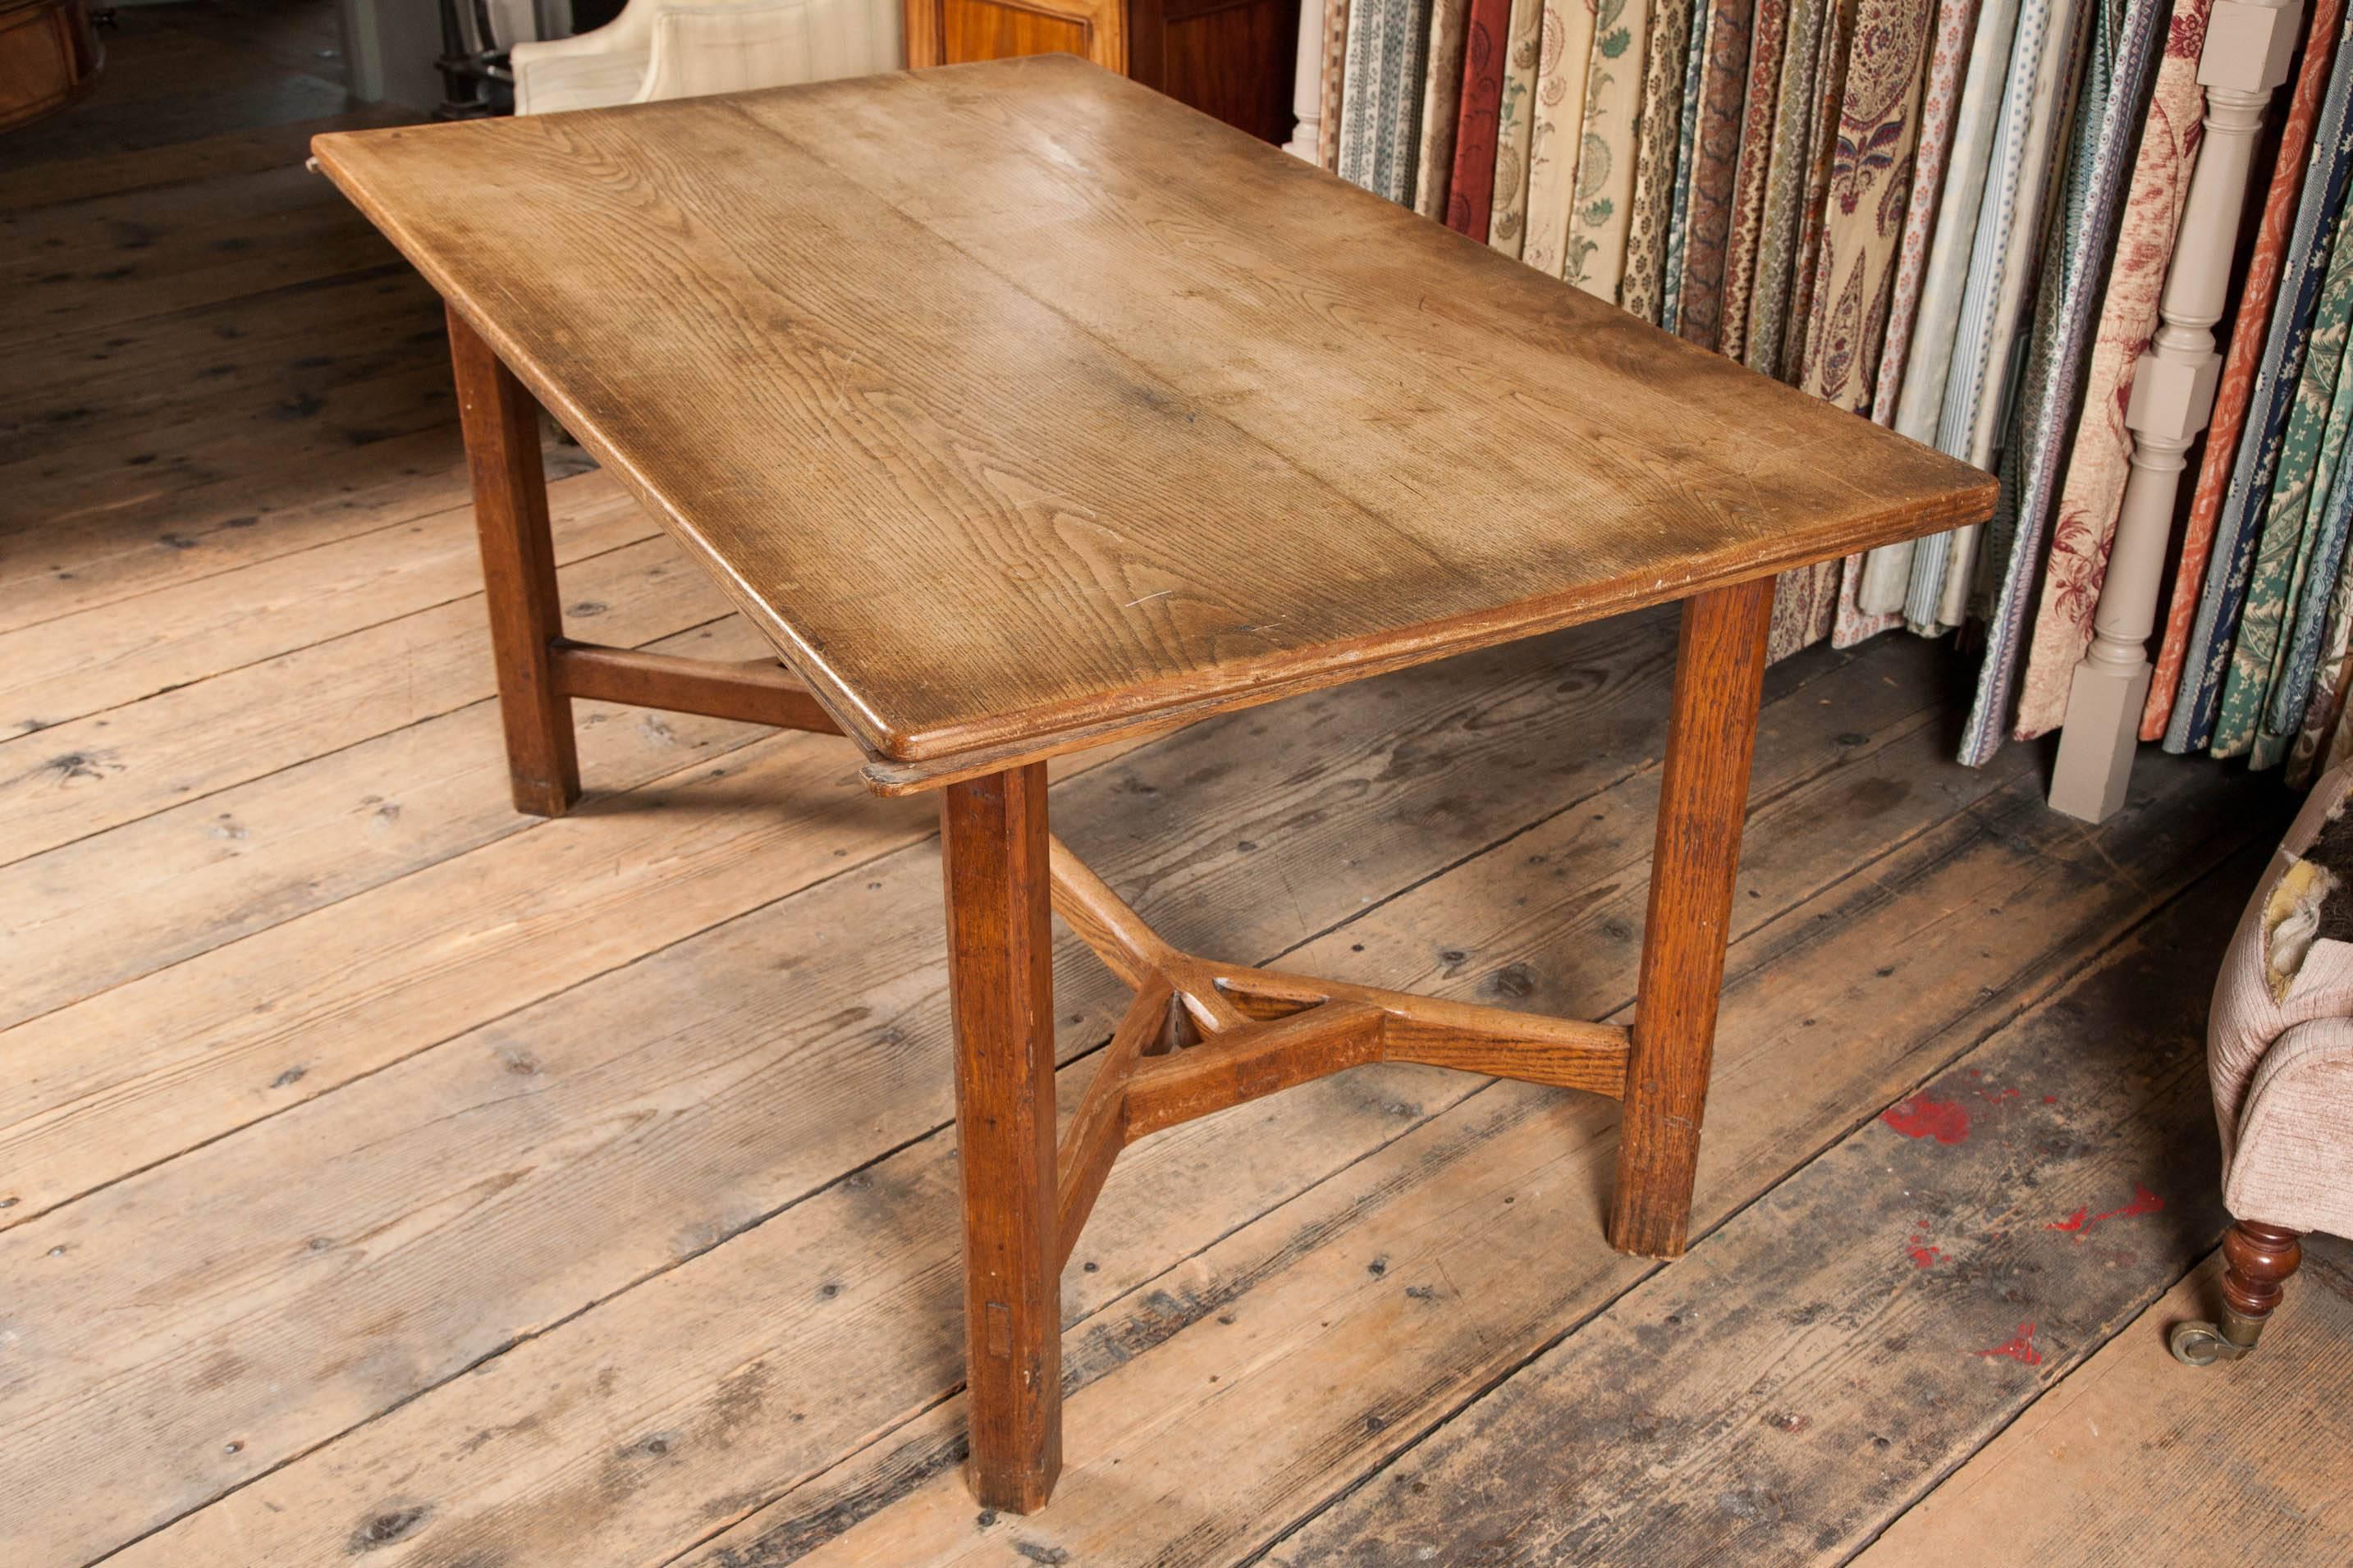 A Cotswold school Arts and Crafts oak table, almost certainly by Edward Barnsley.